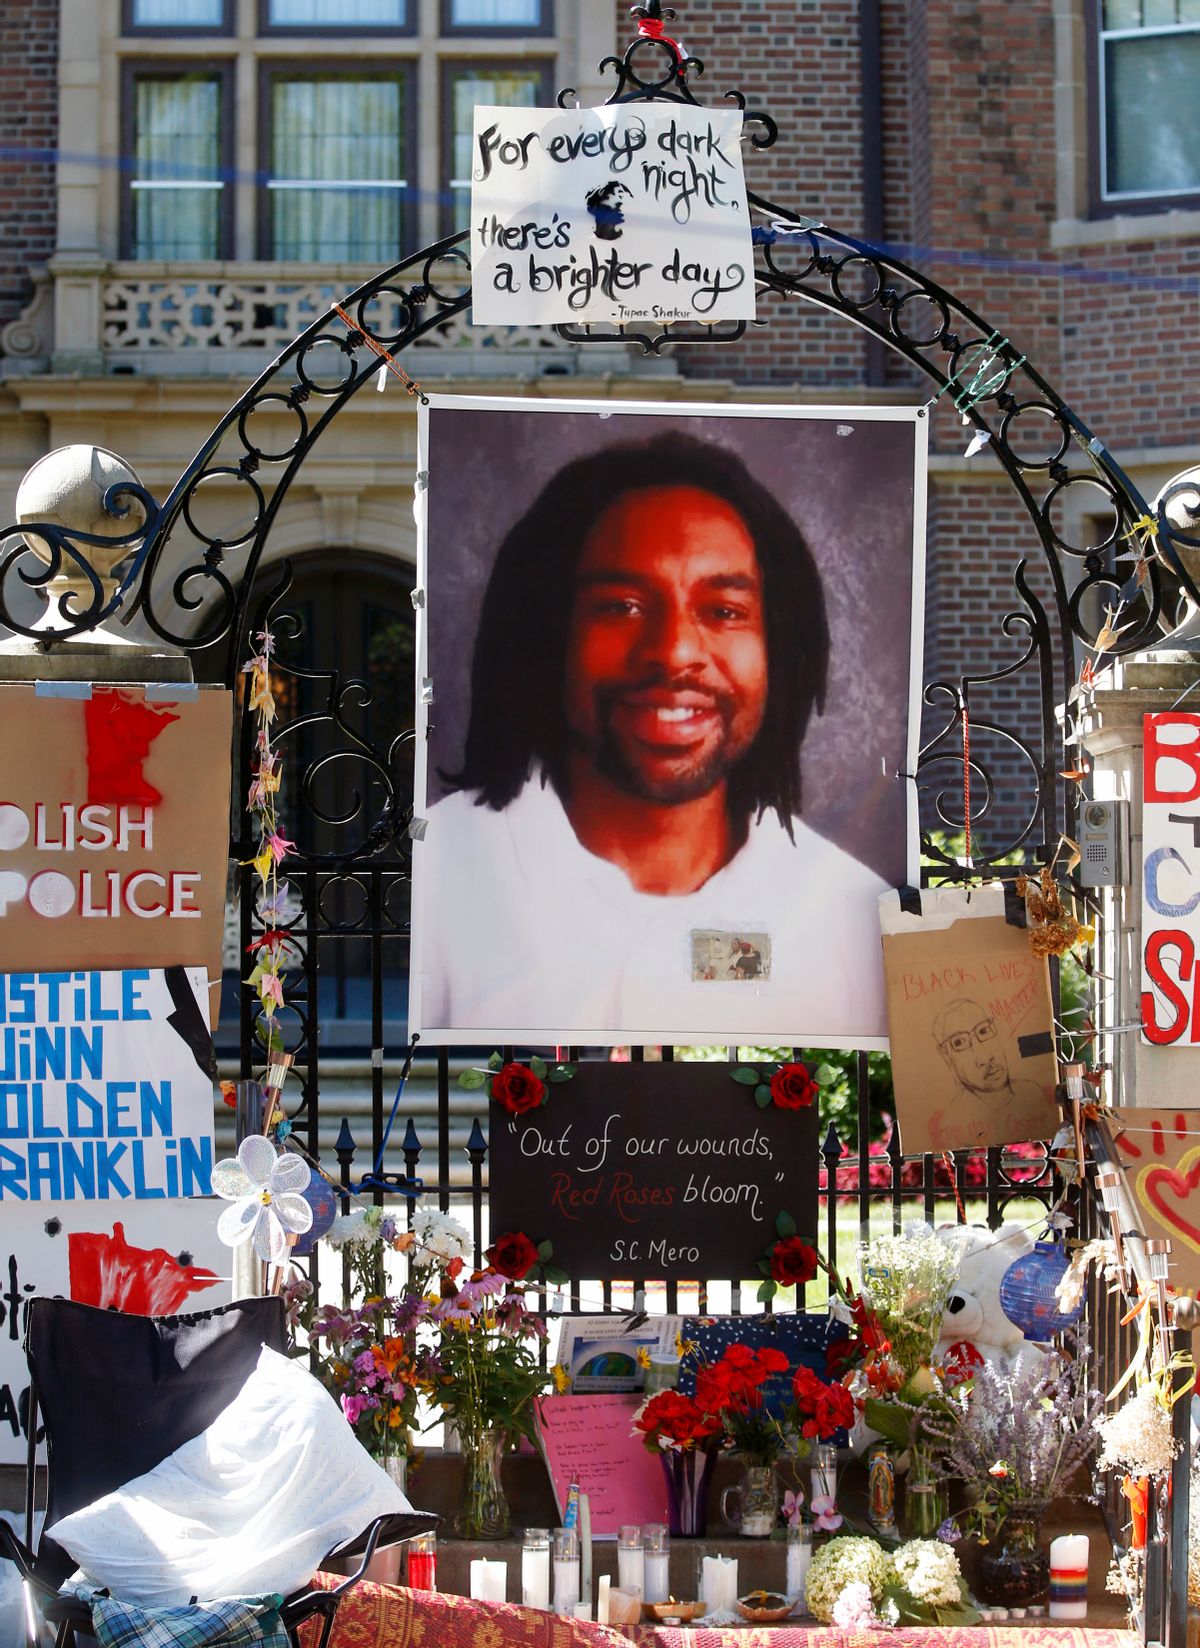 FILE - In this July 25, 2016, file photo, a memorial including a photo of Philando Castile adorns the gate to the governor's residence where protesters continue to demonstrate in St. Paul, Minn., against the July 6 shooting death of Castile by St. Anthony police officer Jeronimo Yanez during a traffic stop in Falcon Heights, Minn. Prosecutors announced Wednesday, Nov. 16, 2016, that Yanez has been charged with second-degree manslaughter in the killing. (AP Photo/Jim Mone, File) (AP)